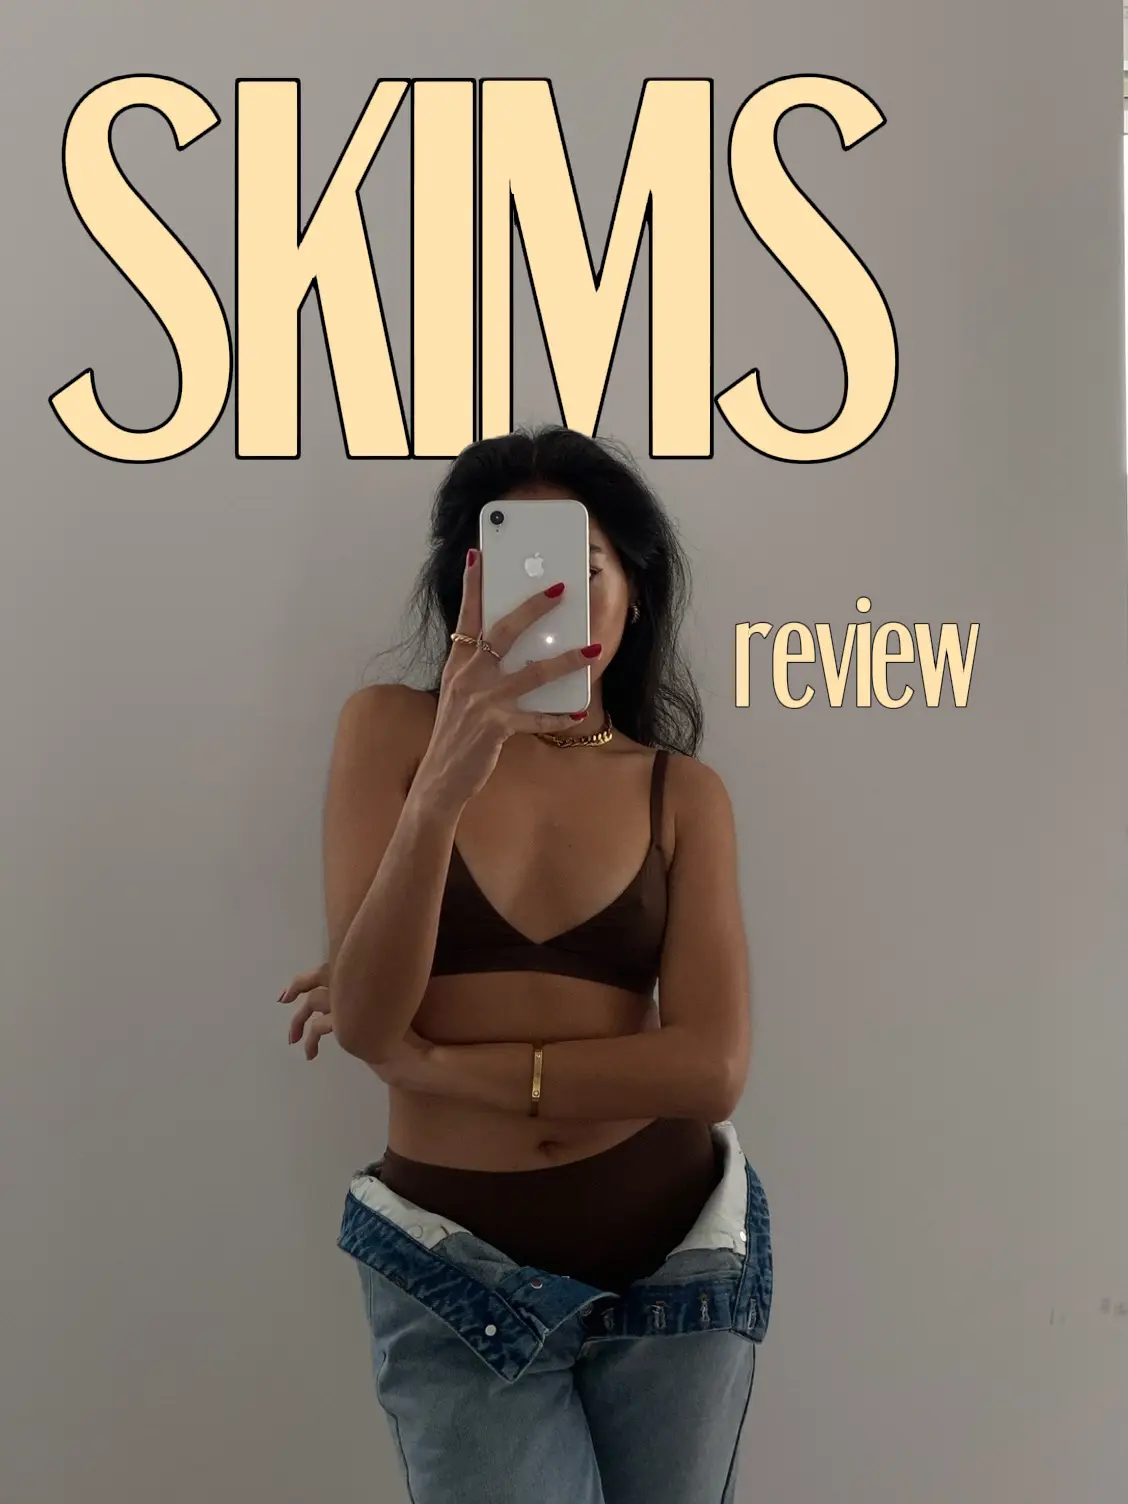 Honest opinion about skims, Gallery posted by 𝐄𝐌𝐈𝐋𝐘 𝐂𝐇𝐔𝐒𝐒𝐘